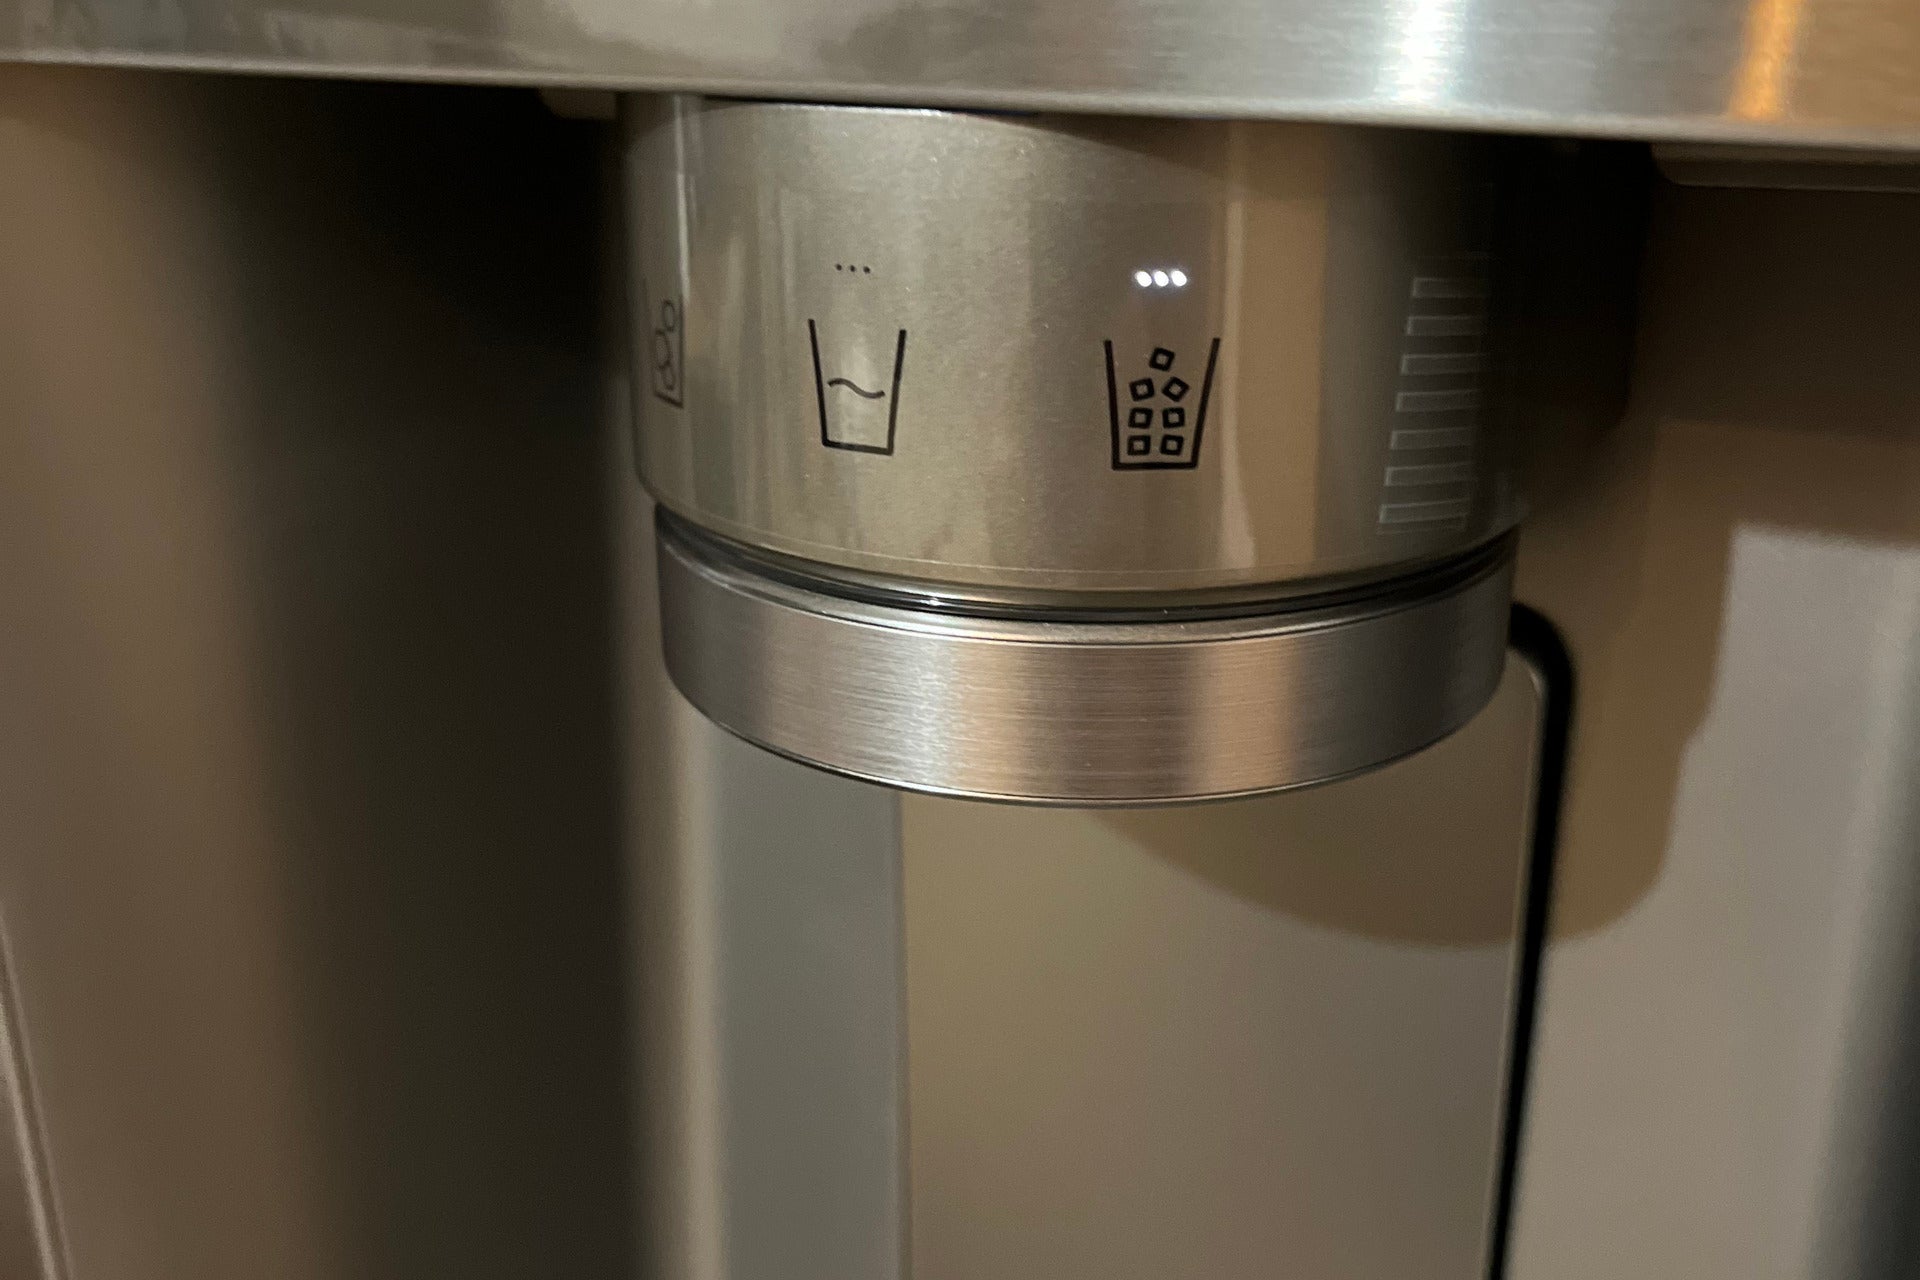 LG LRYKC2606S ice and water dispenser